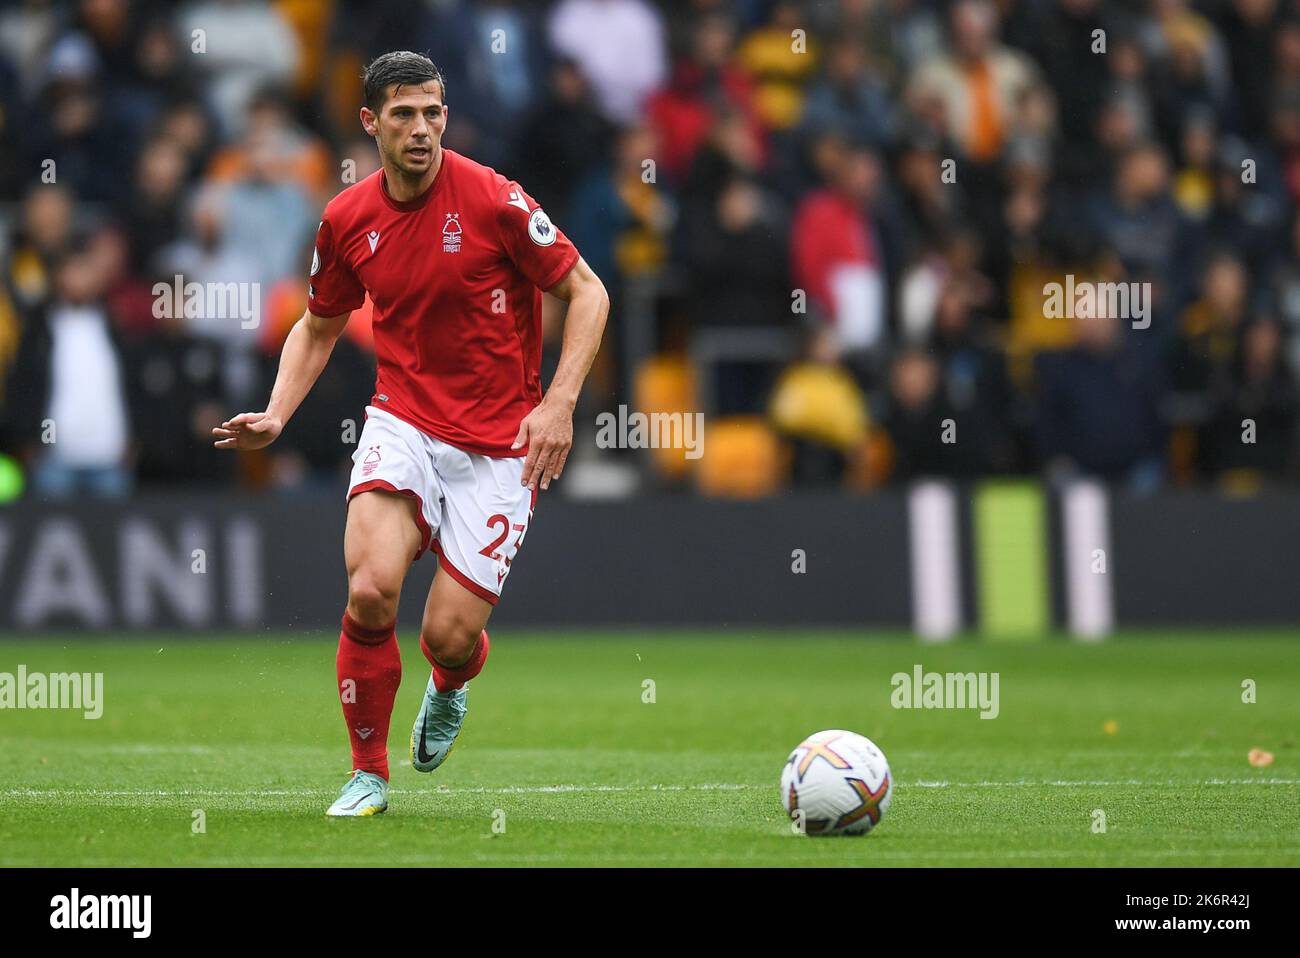 Remo Freuler #23 of Nottingham Forest during the Premier League match Wolverhampton Wanderers vs Nottingham Forest at Molineux, Wolverhampton, United Kingdom, 15th October 2022  (Photo by Mike Jones/News Images) Stock Photo